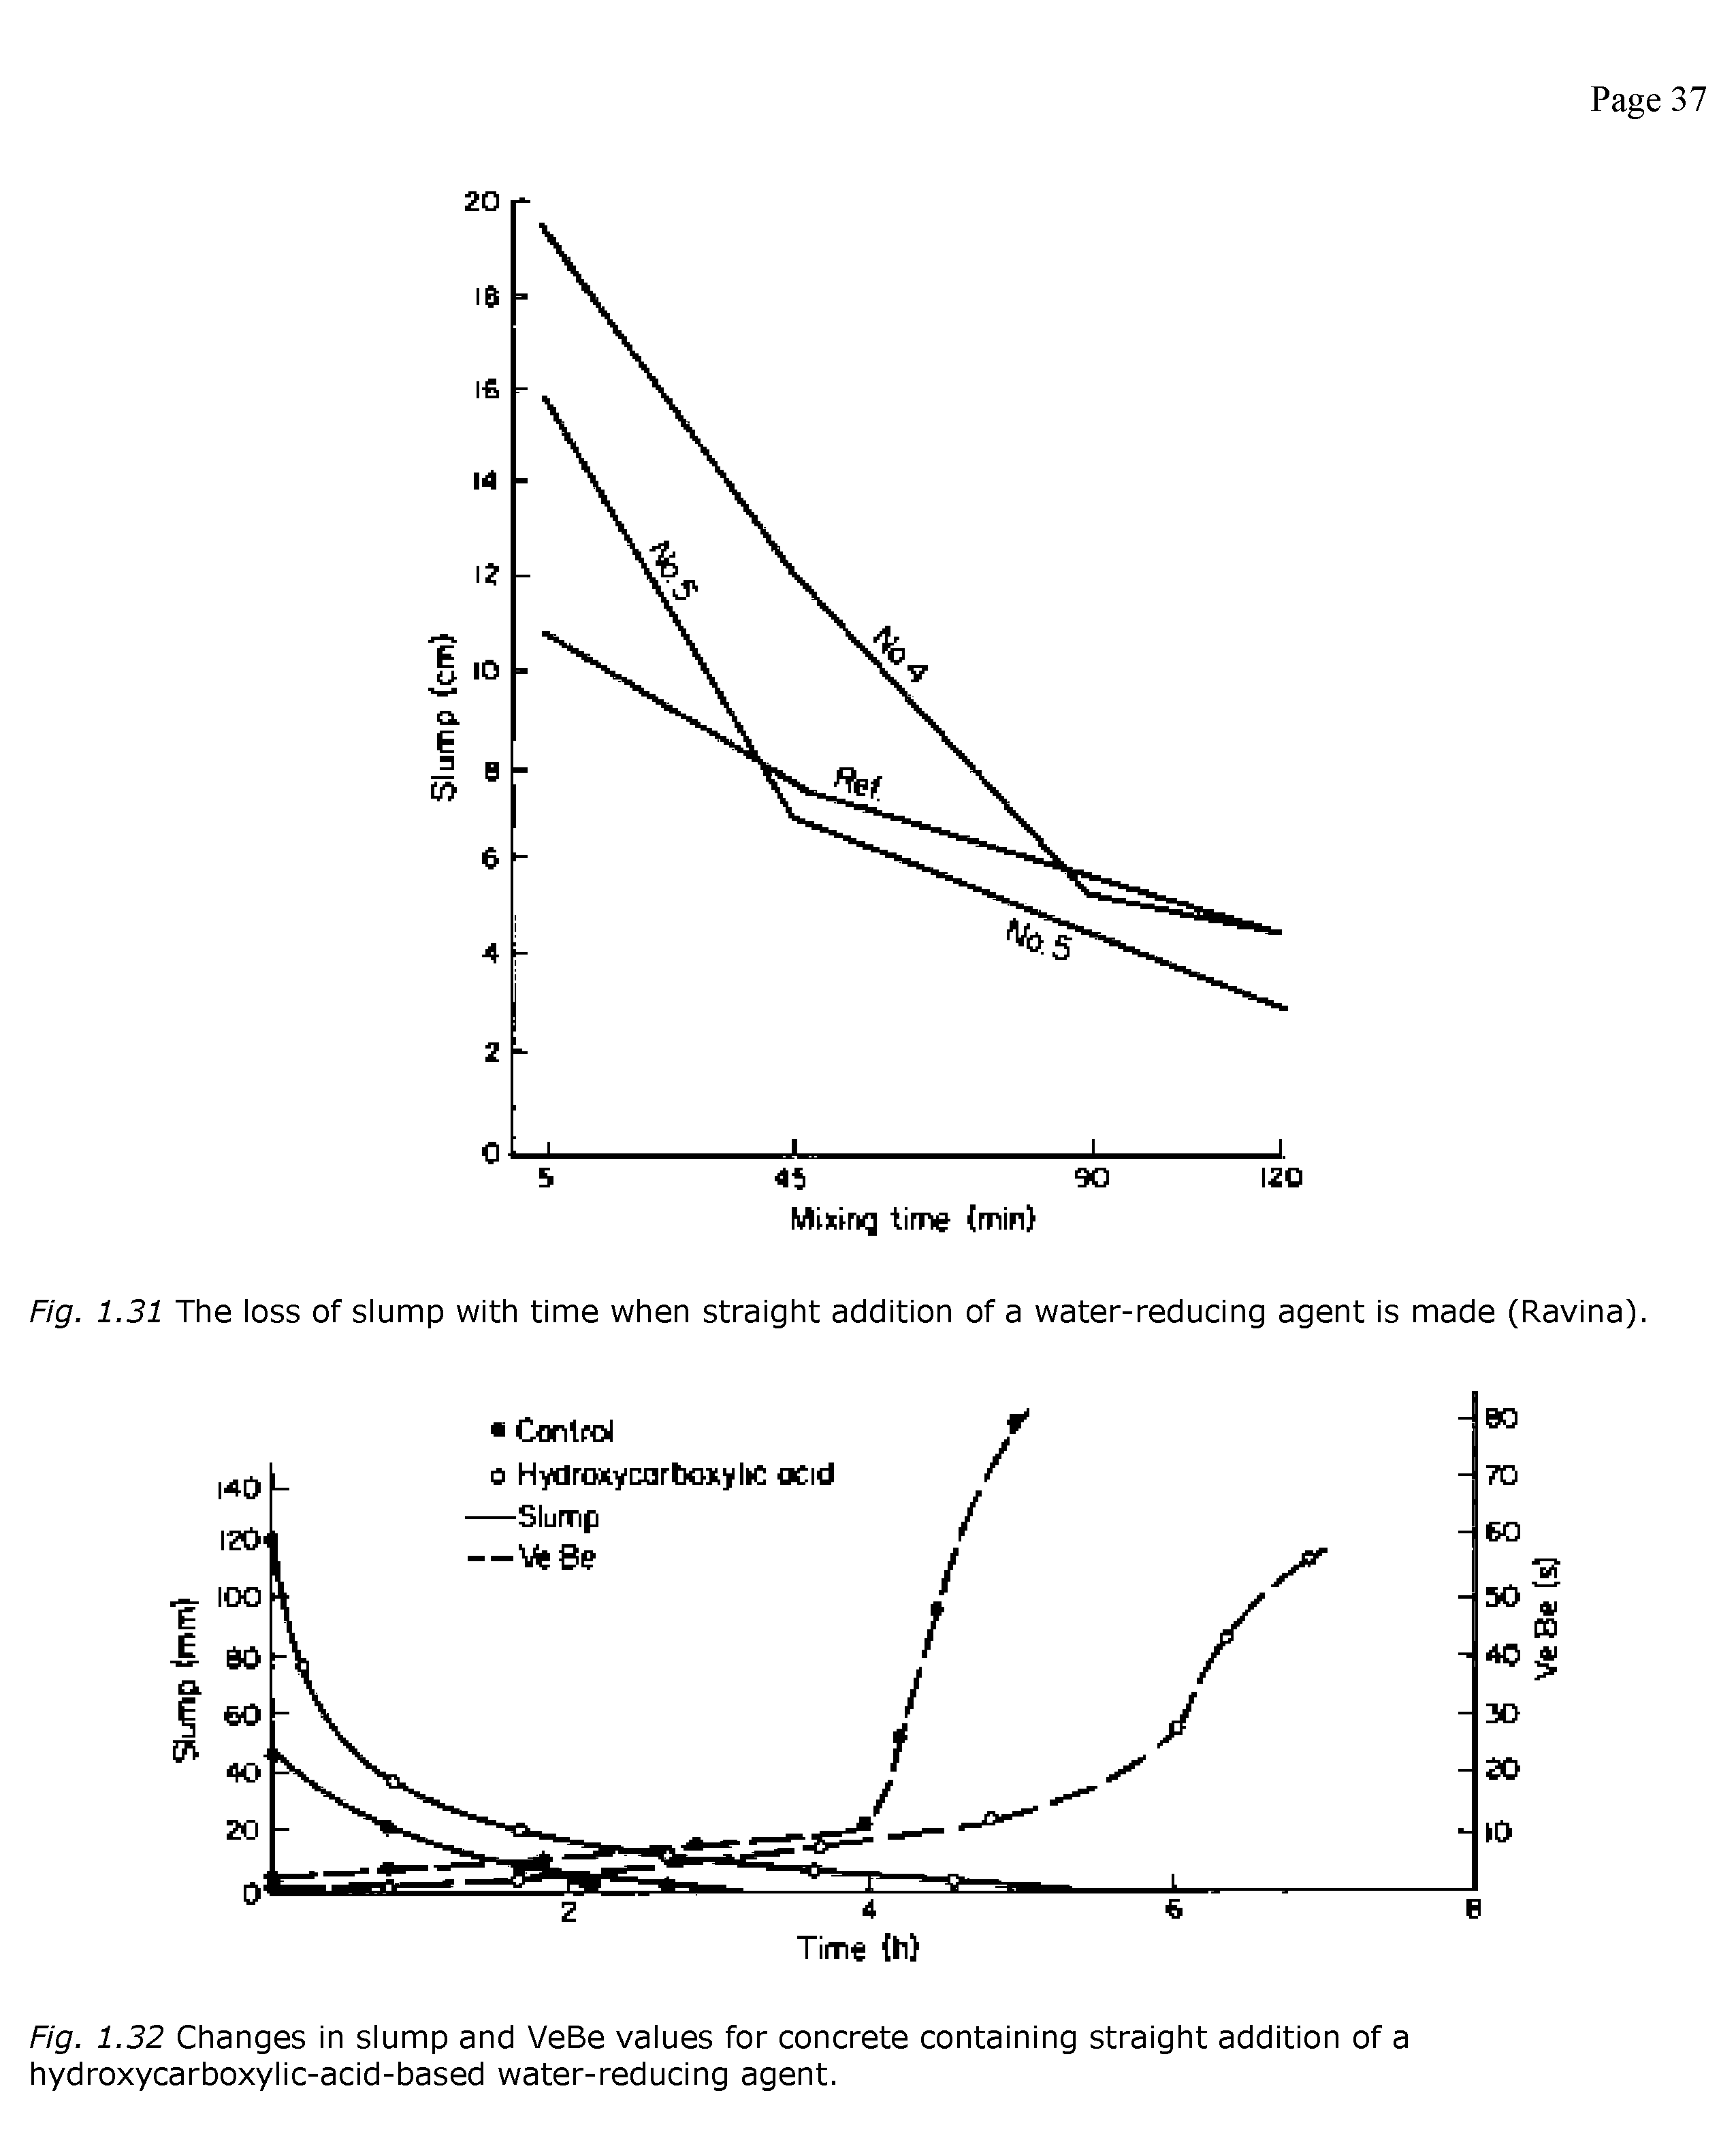 Fig. 1.31 The loss of slump with time when straight addition of a water-reducing agent is made (Ravina).